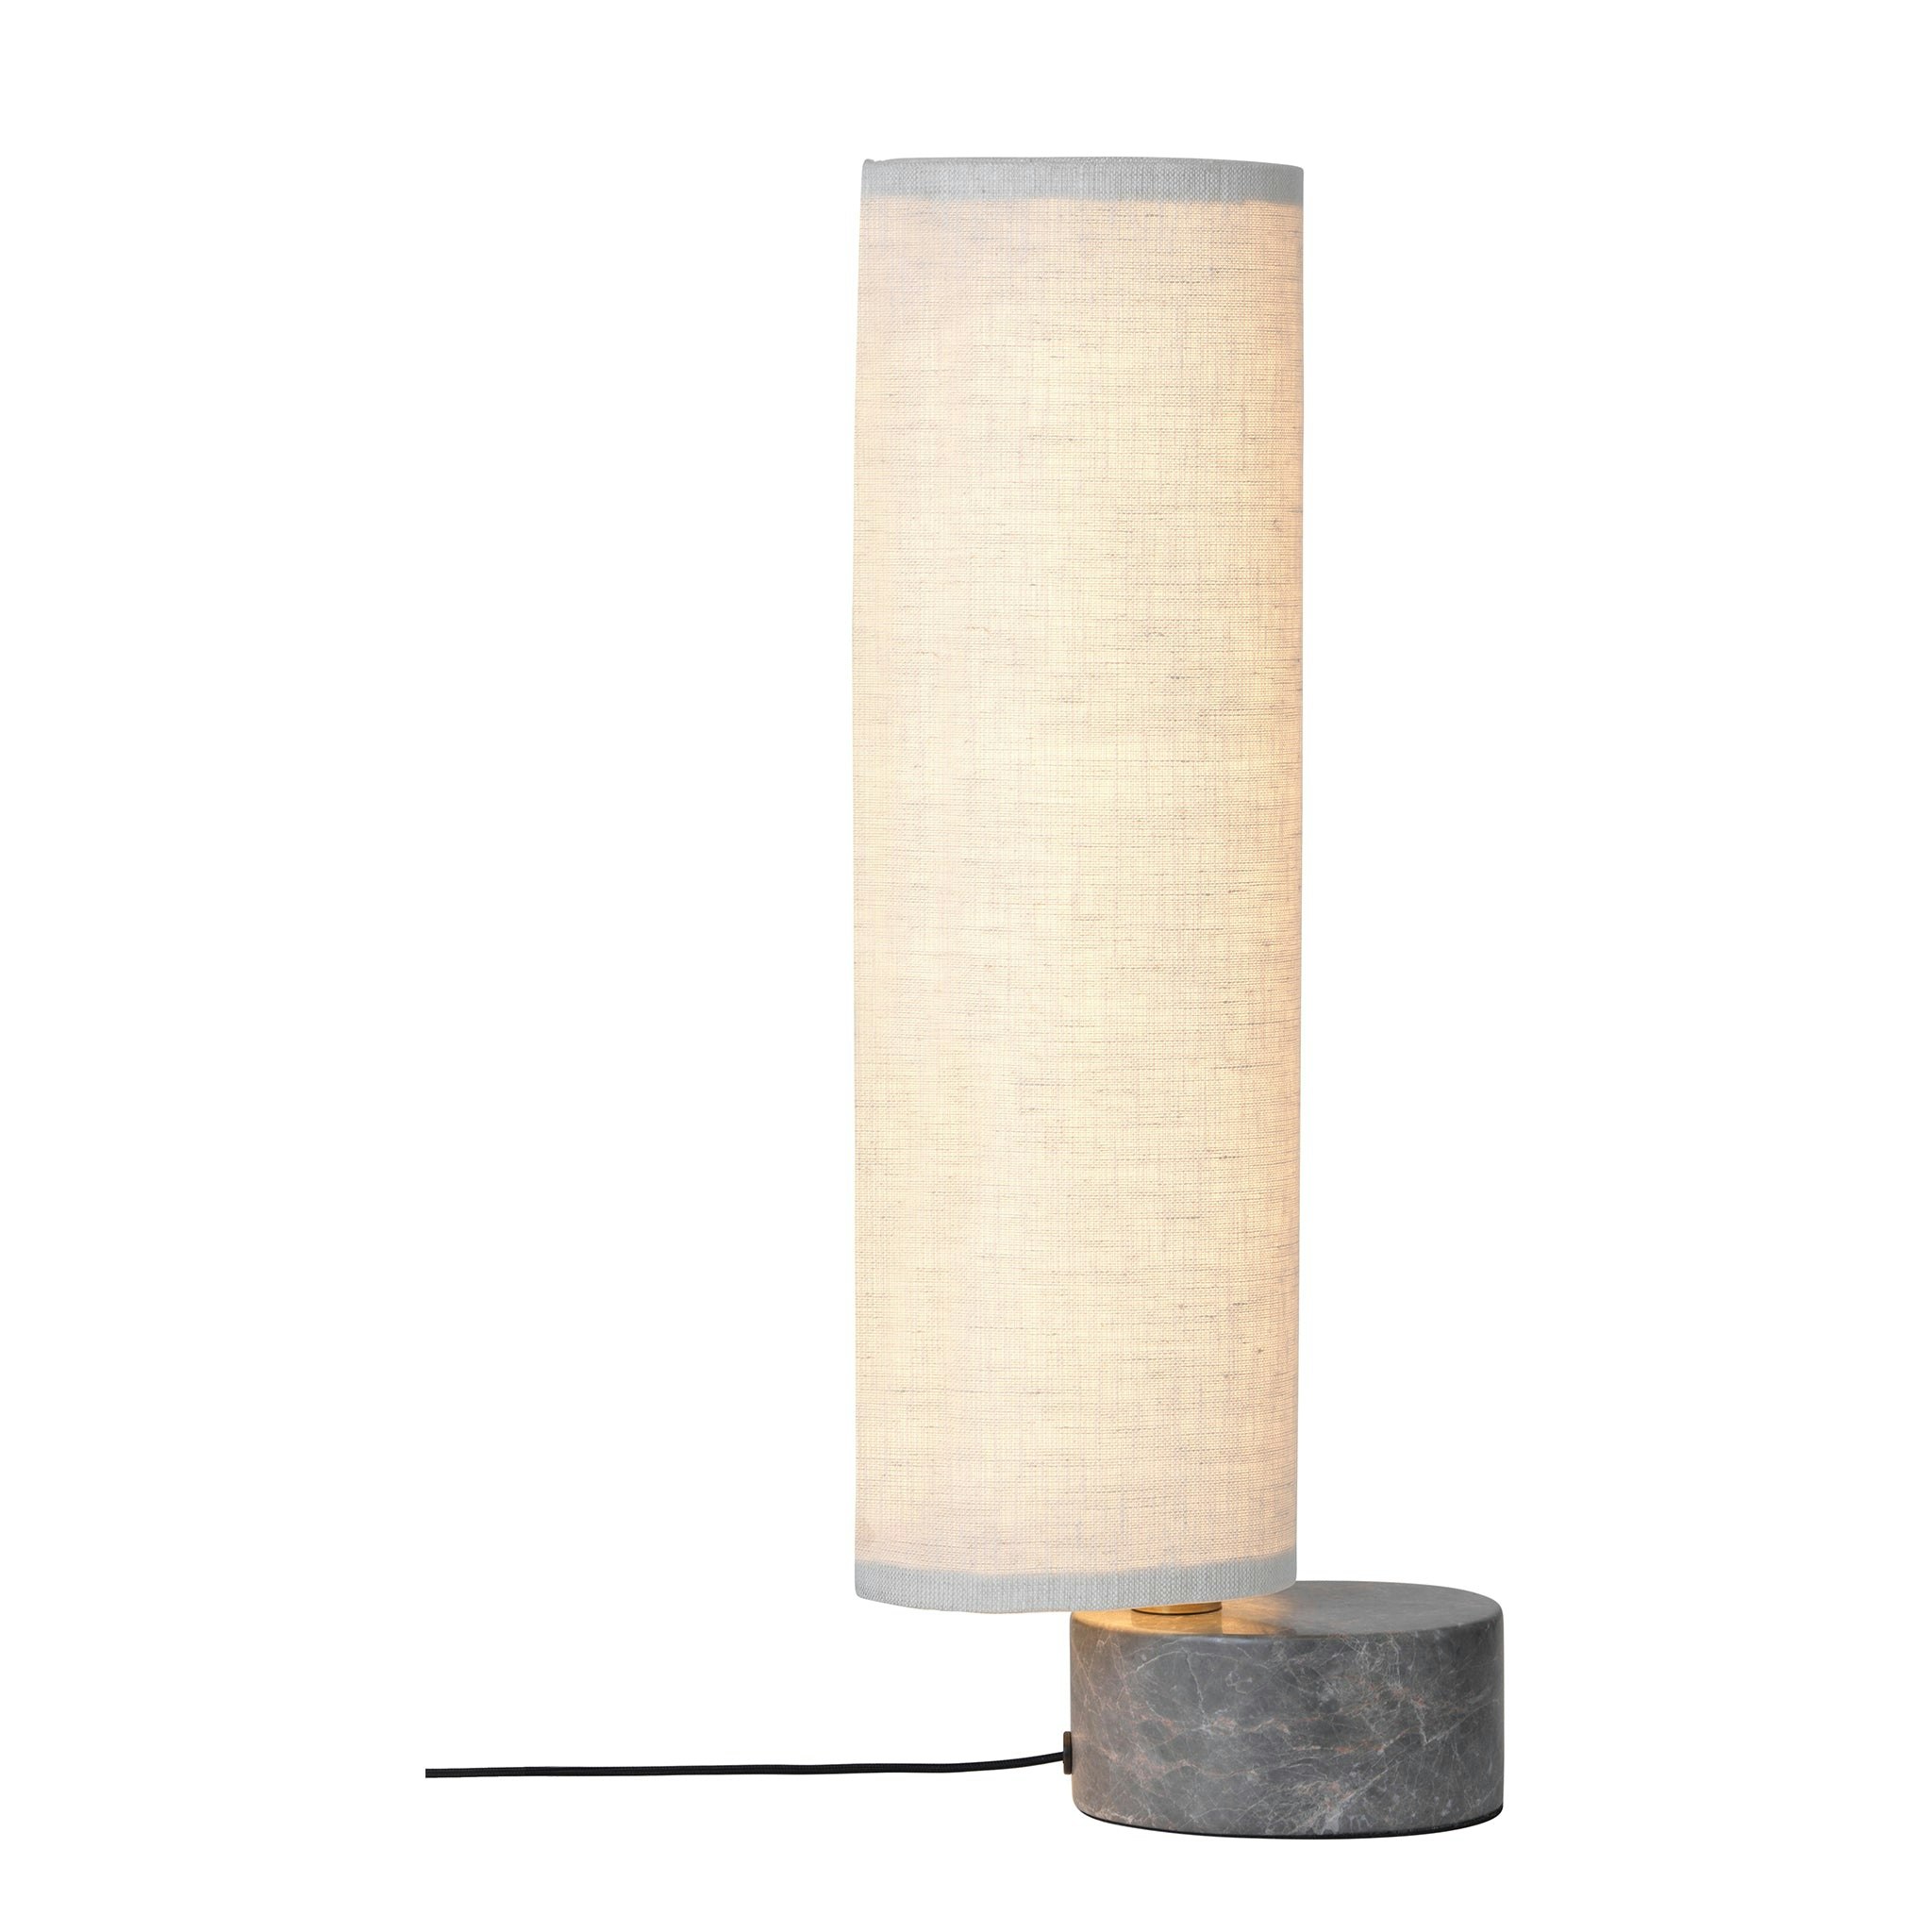 Unbound Table Lamp by Gubi